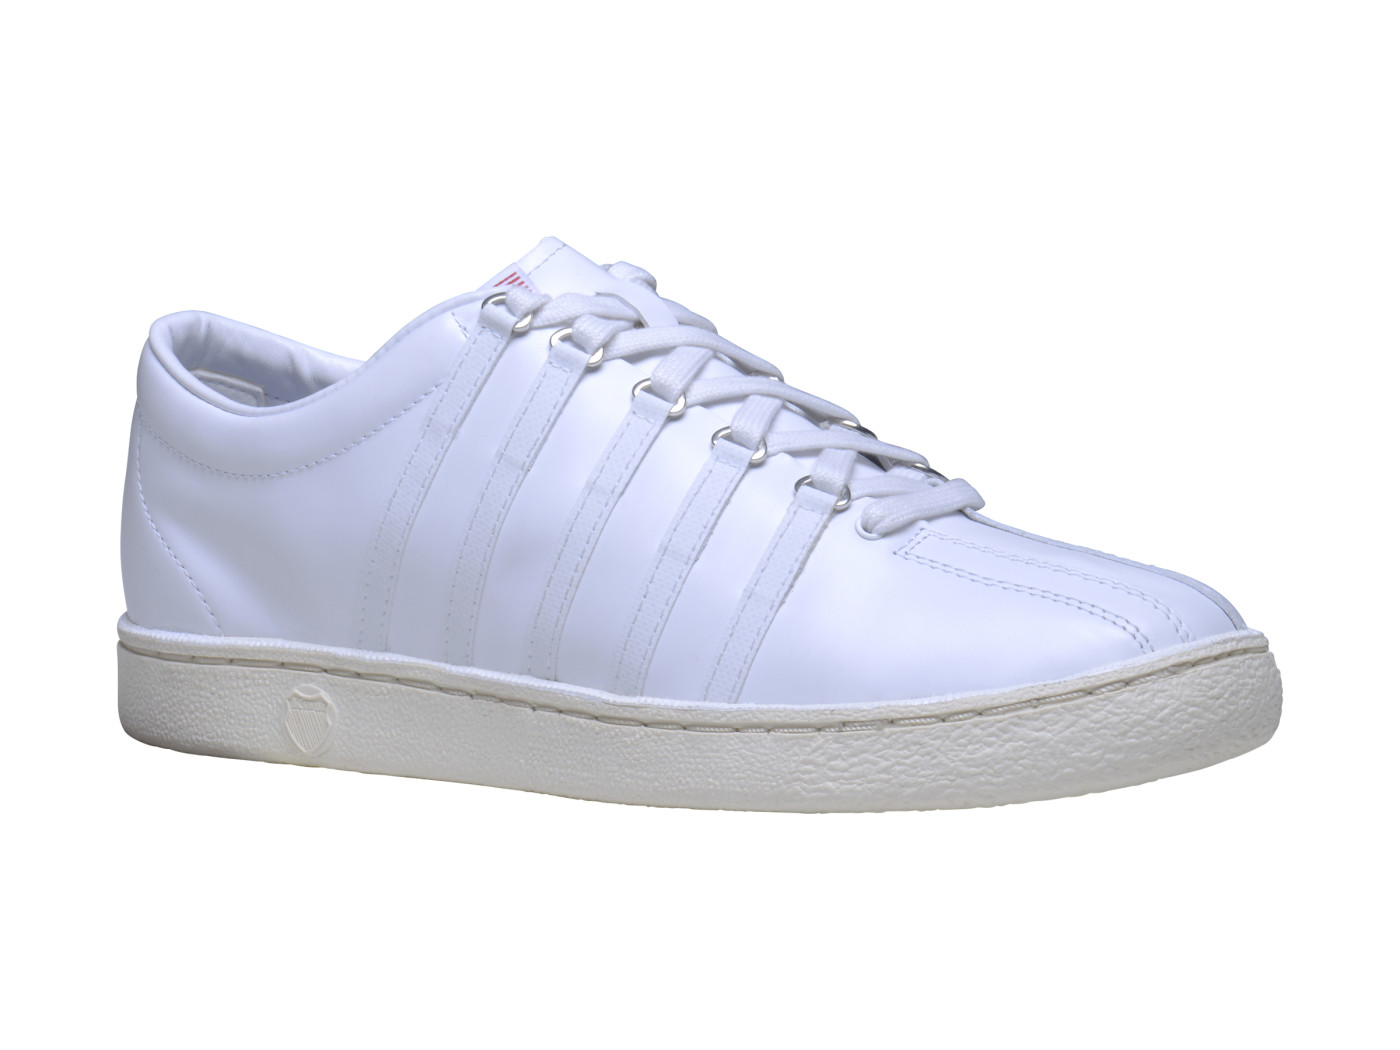 K Swiss Special Edition Shoes